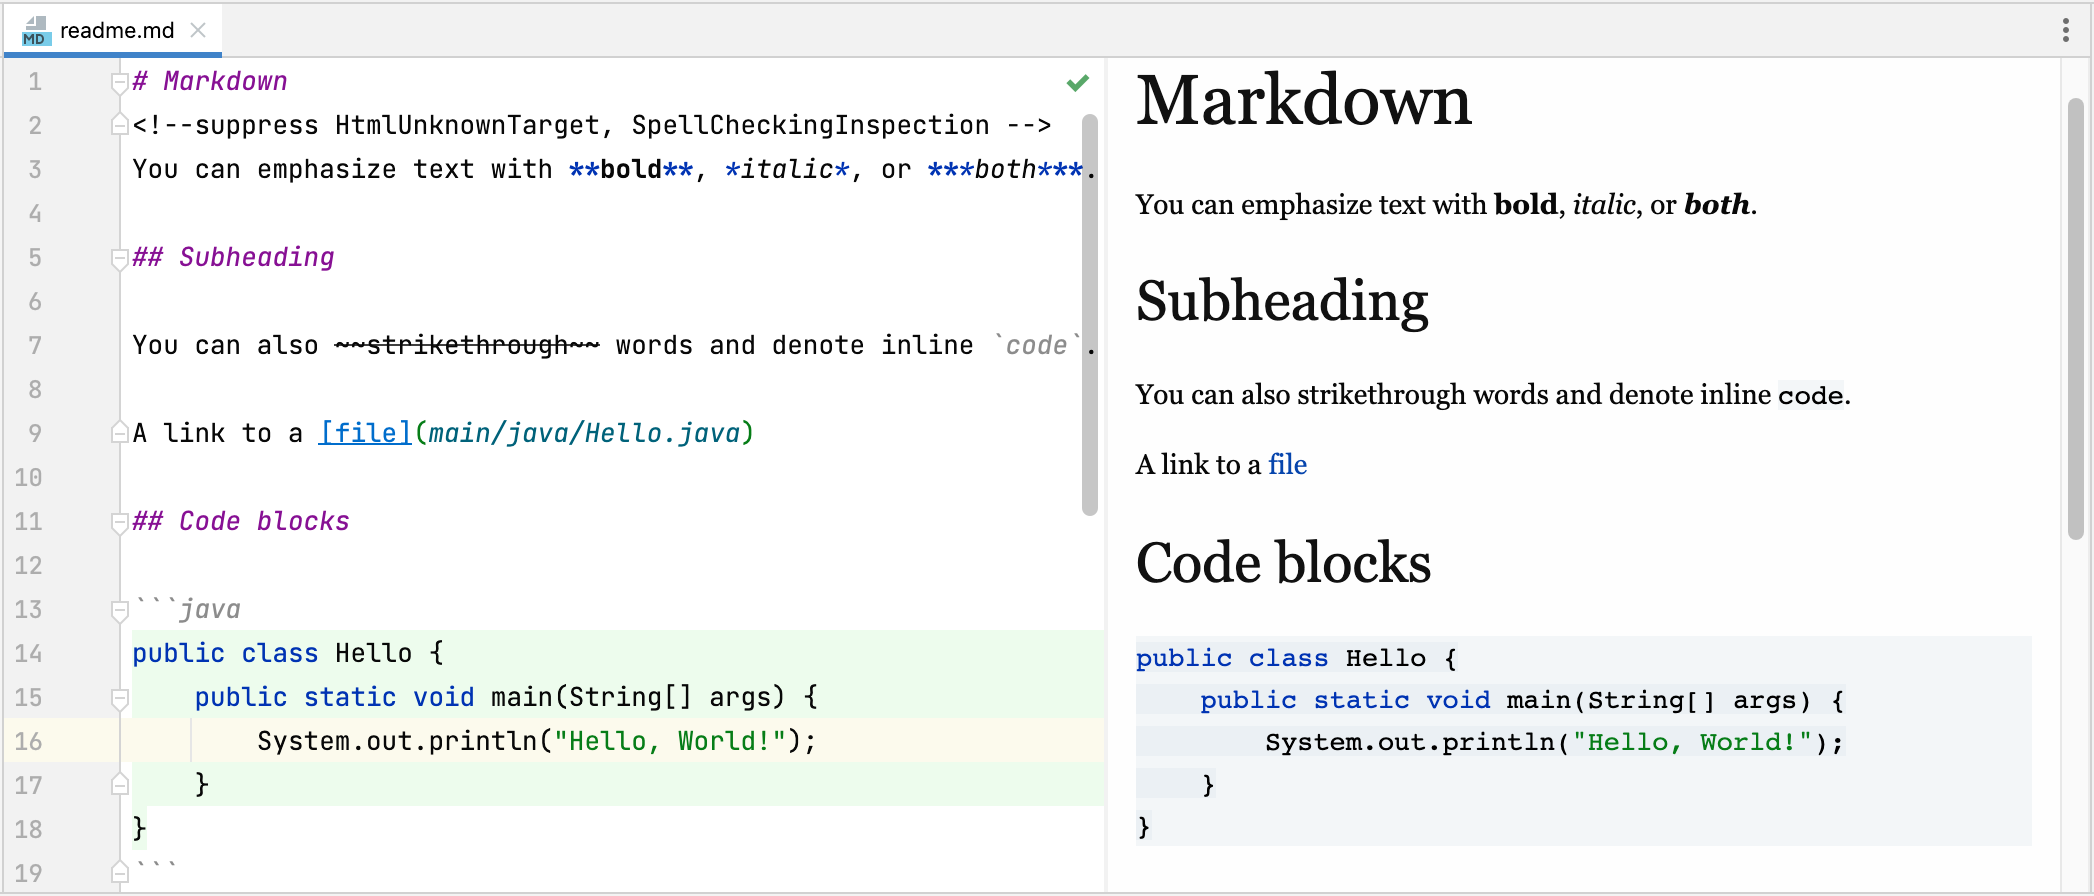 Markdown preview with a custom CSS that resembles GitHub rendering style